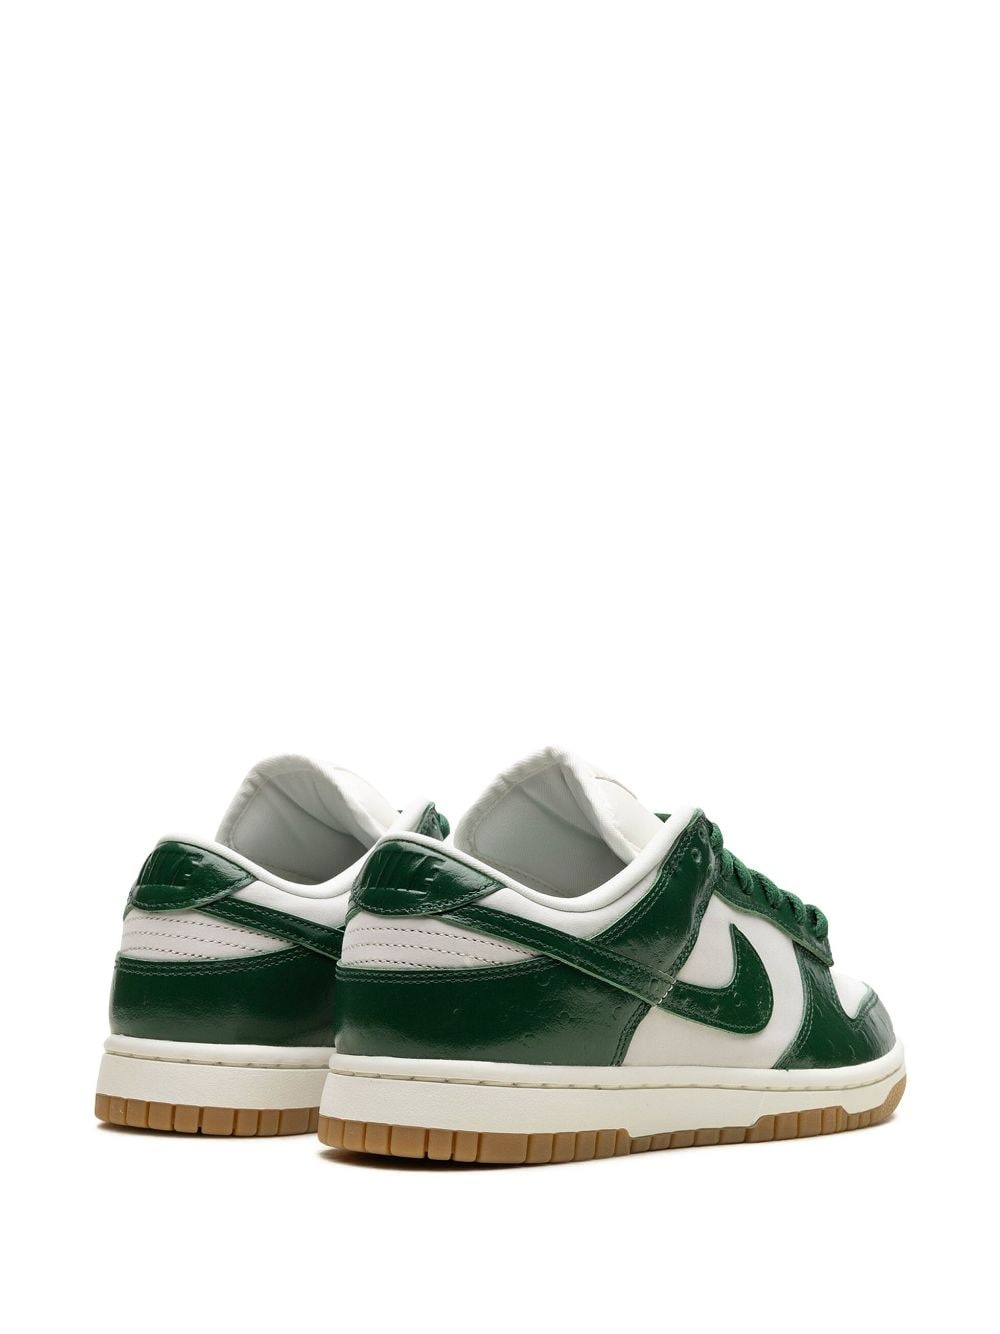 Dunk Low LX "Gorge Green Ostrich" sneakers - 3